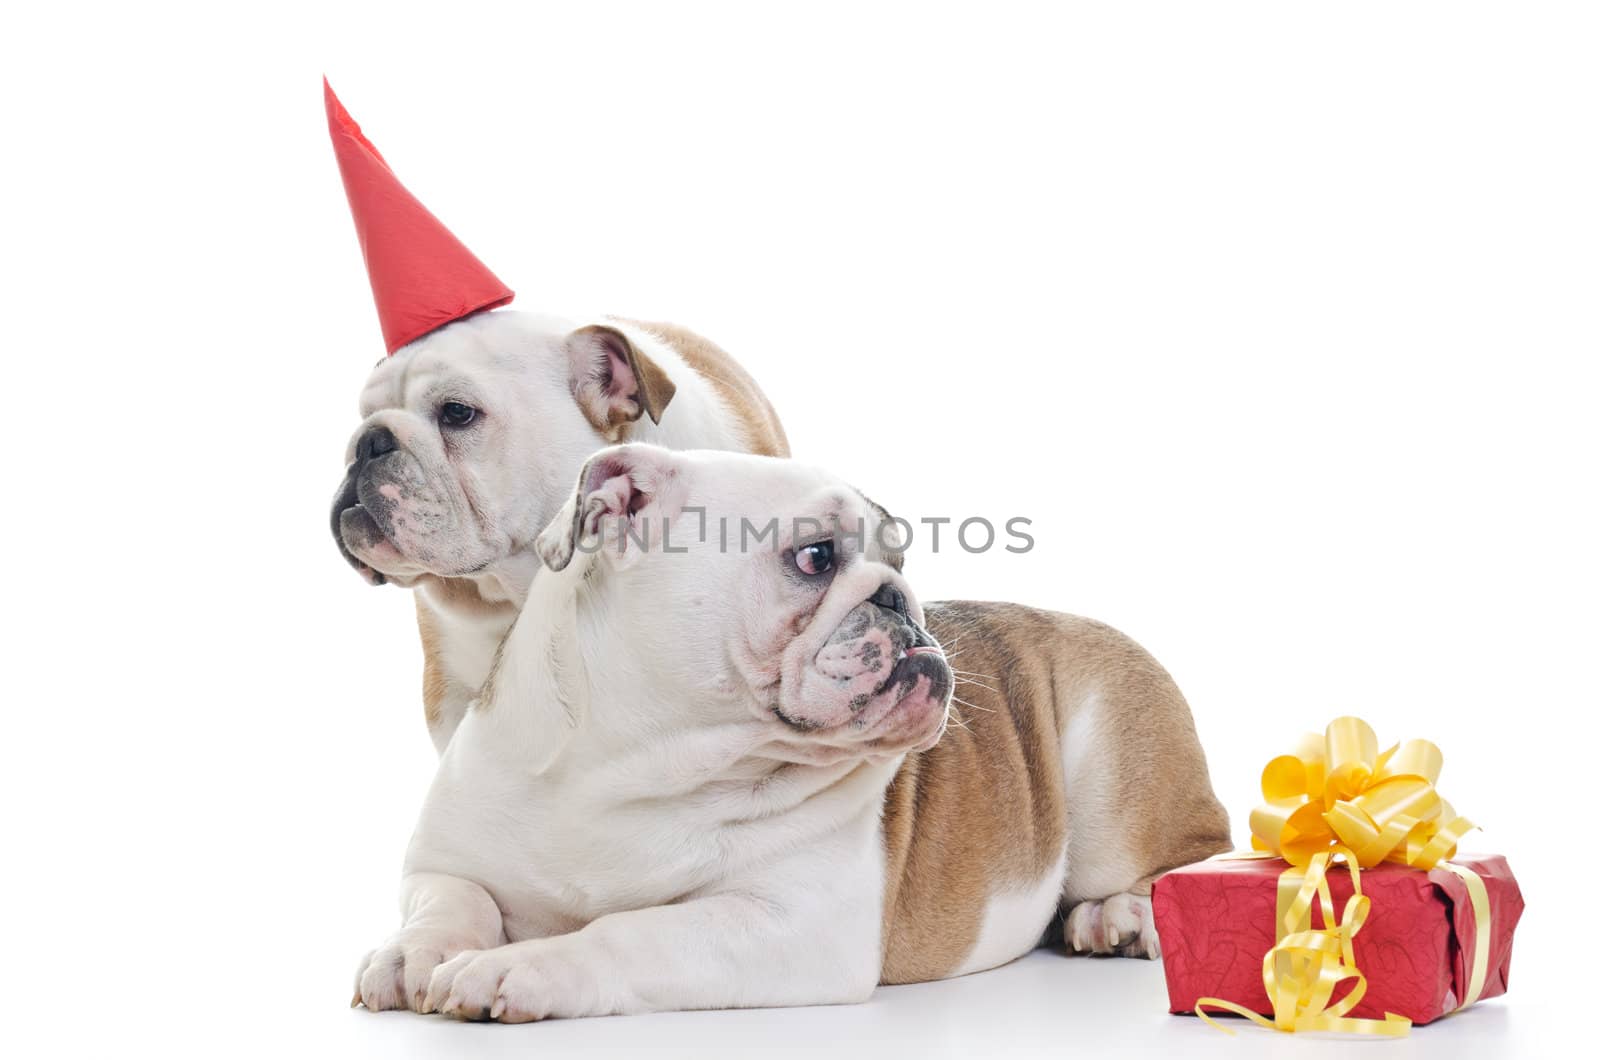 Two English Bulldog dogs over white background, One wearing red party hat, Other laying and looking off camera, Horizontal shot